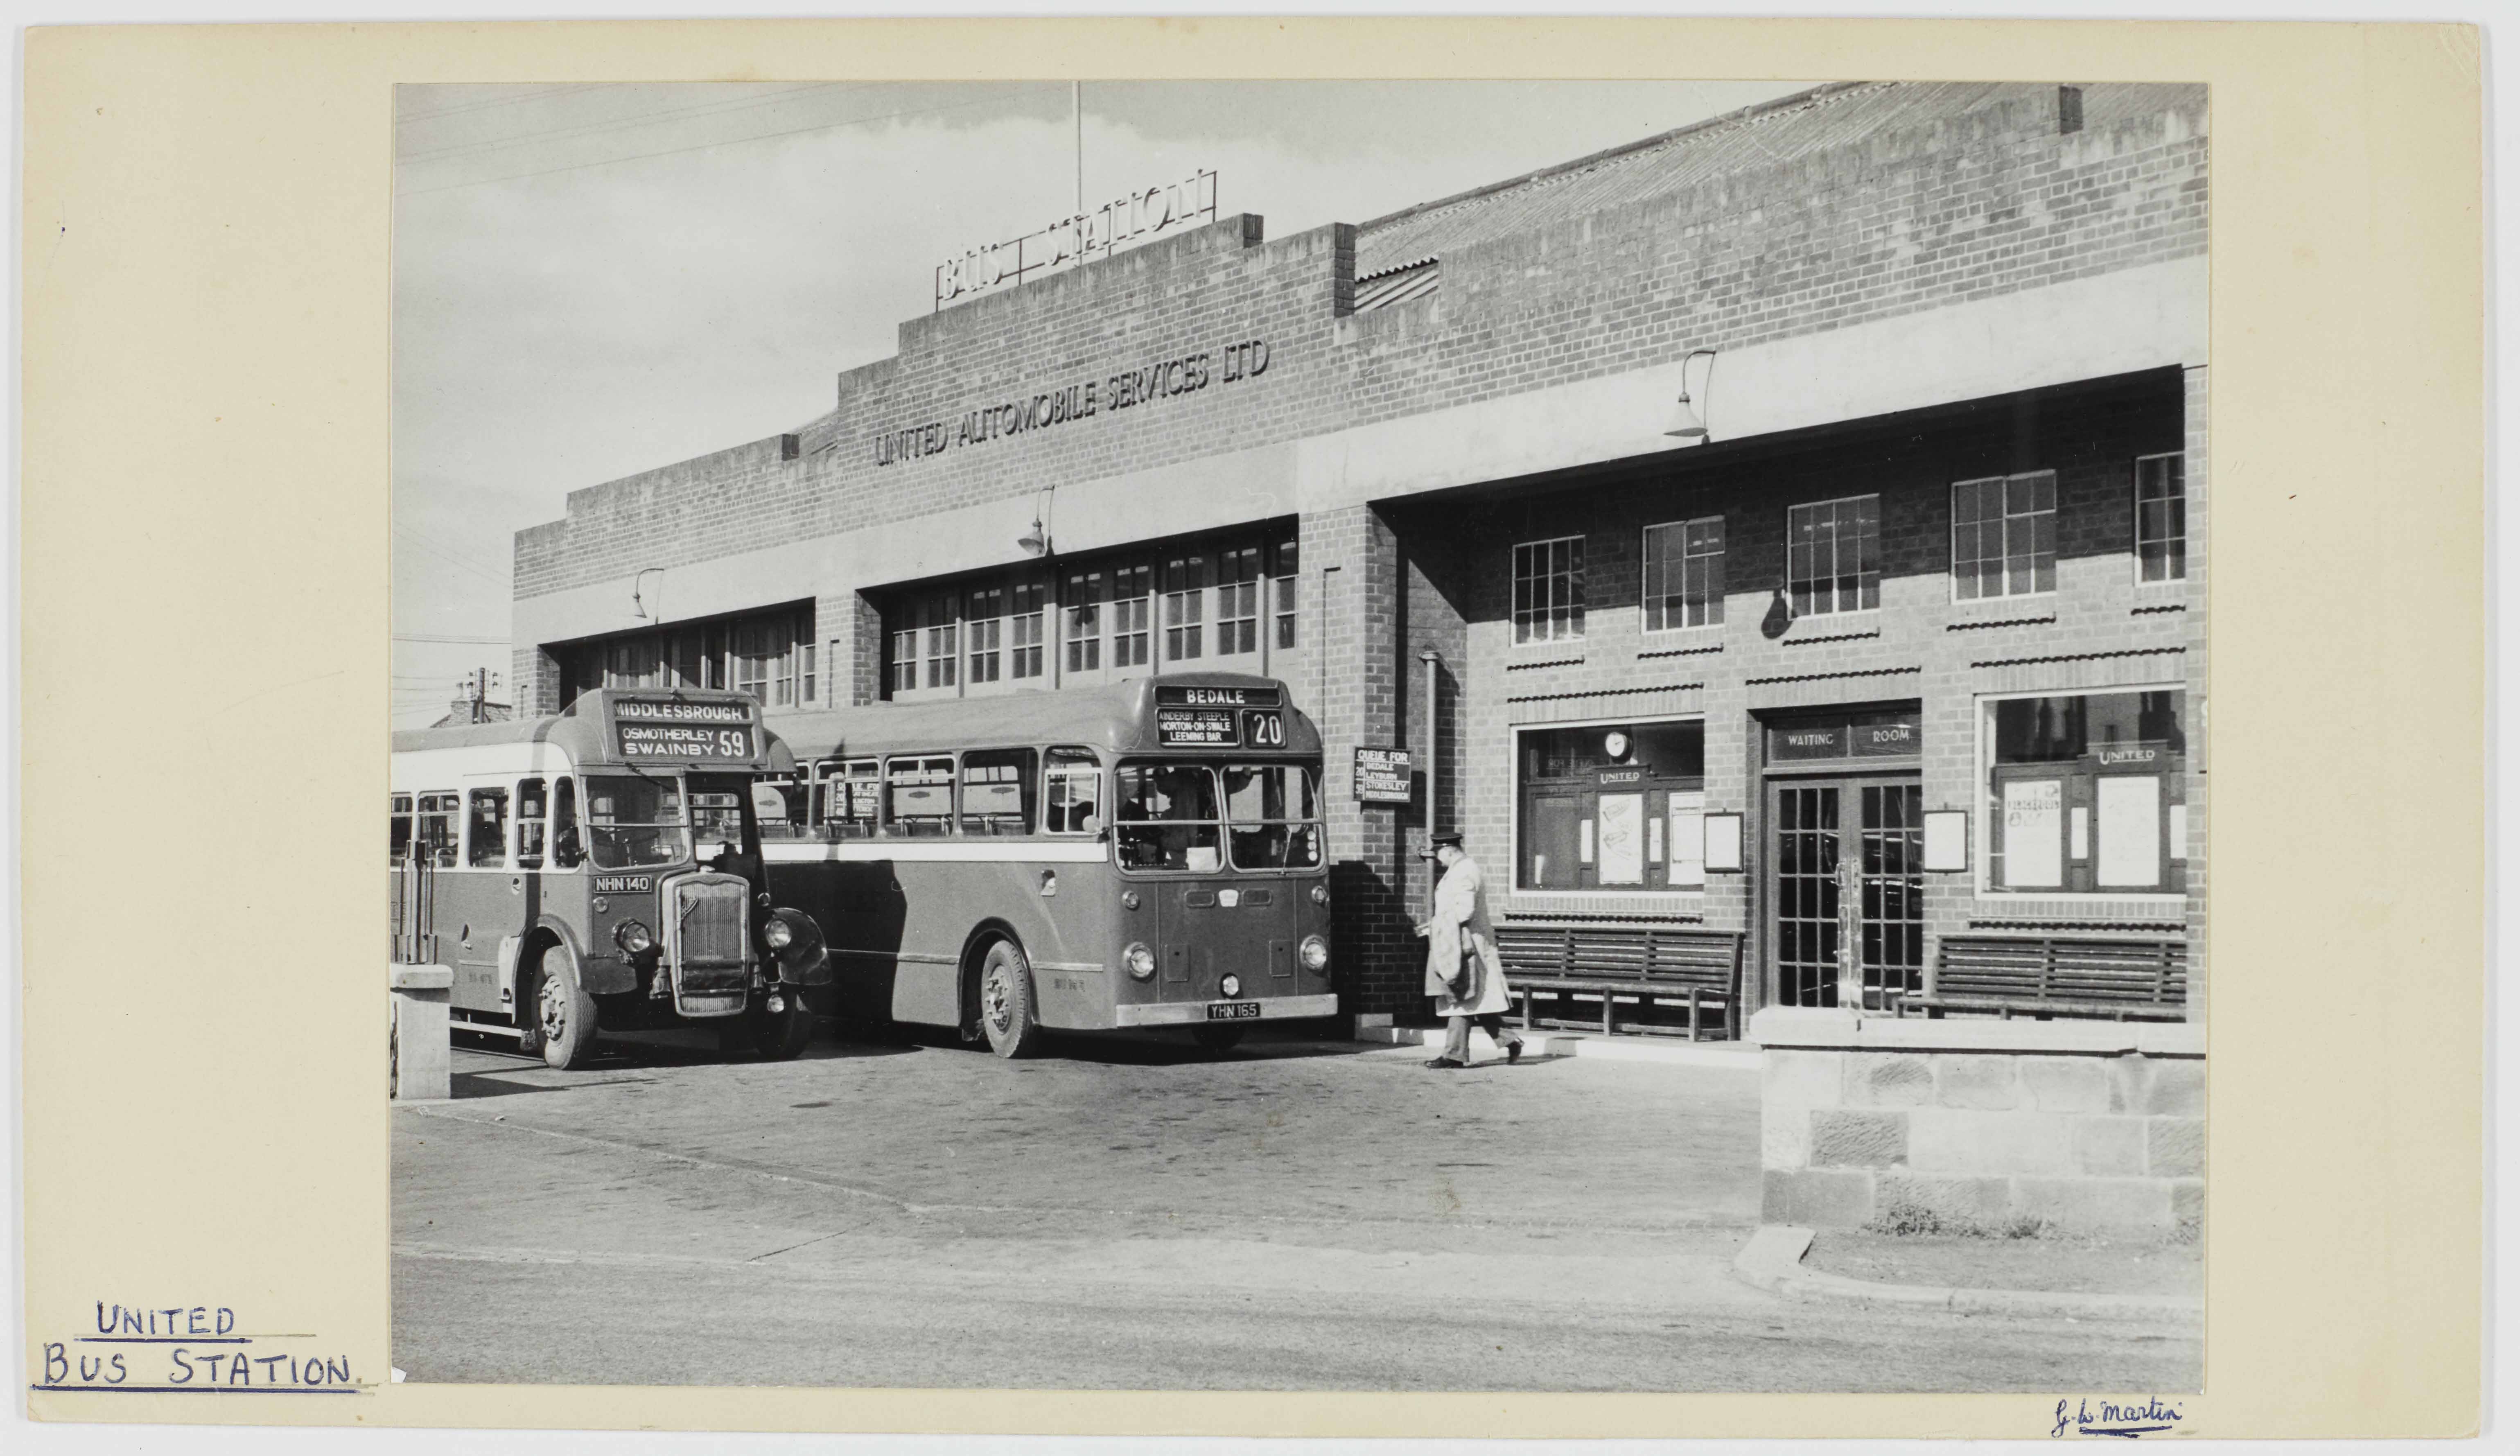 The United bus station, Northallerton, in 1956.